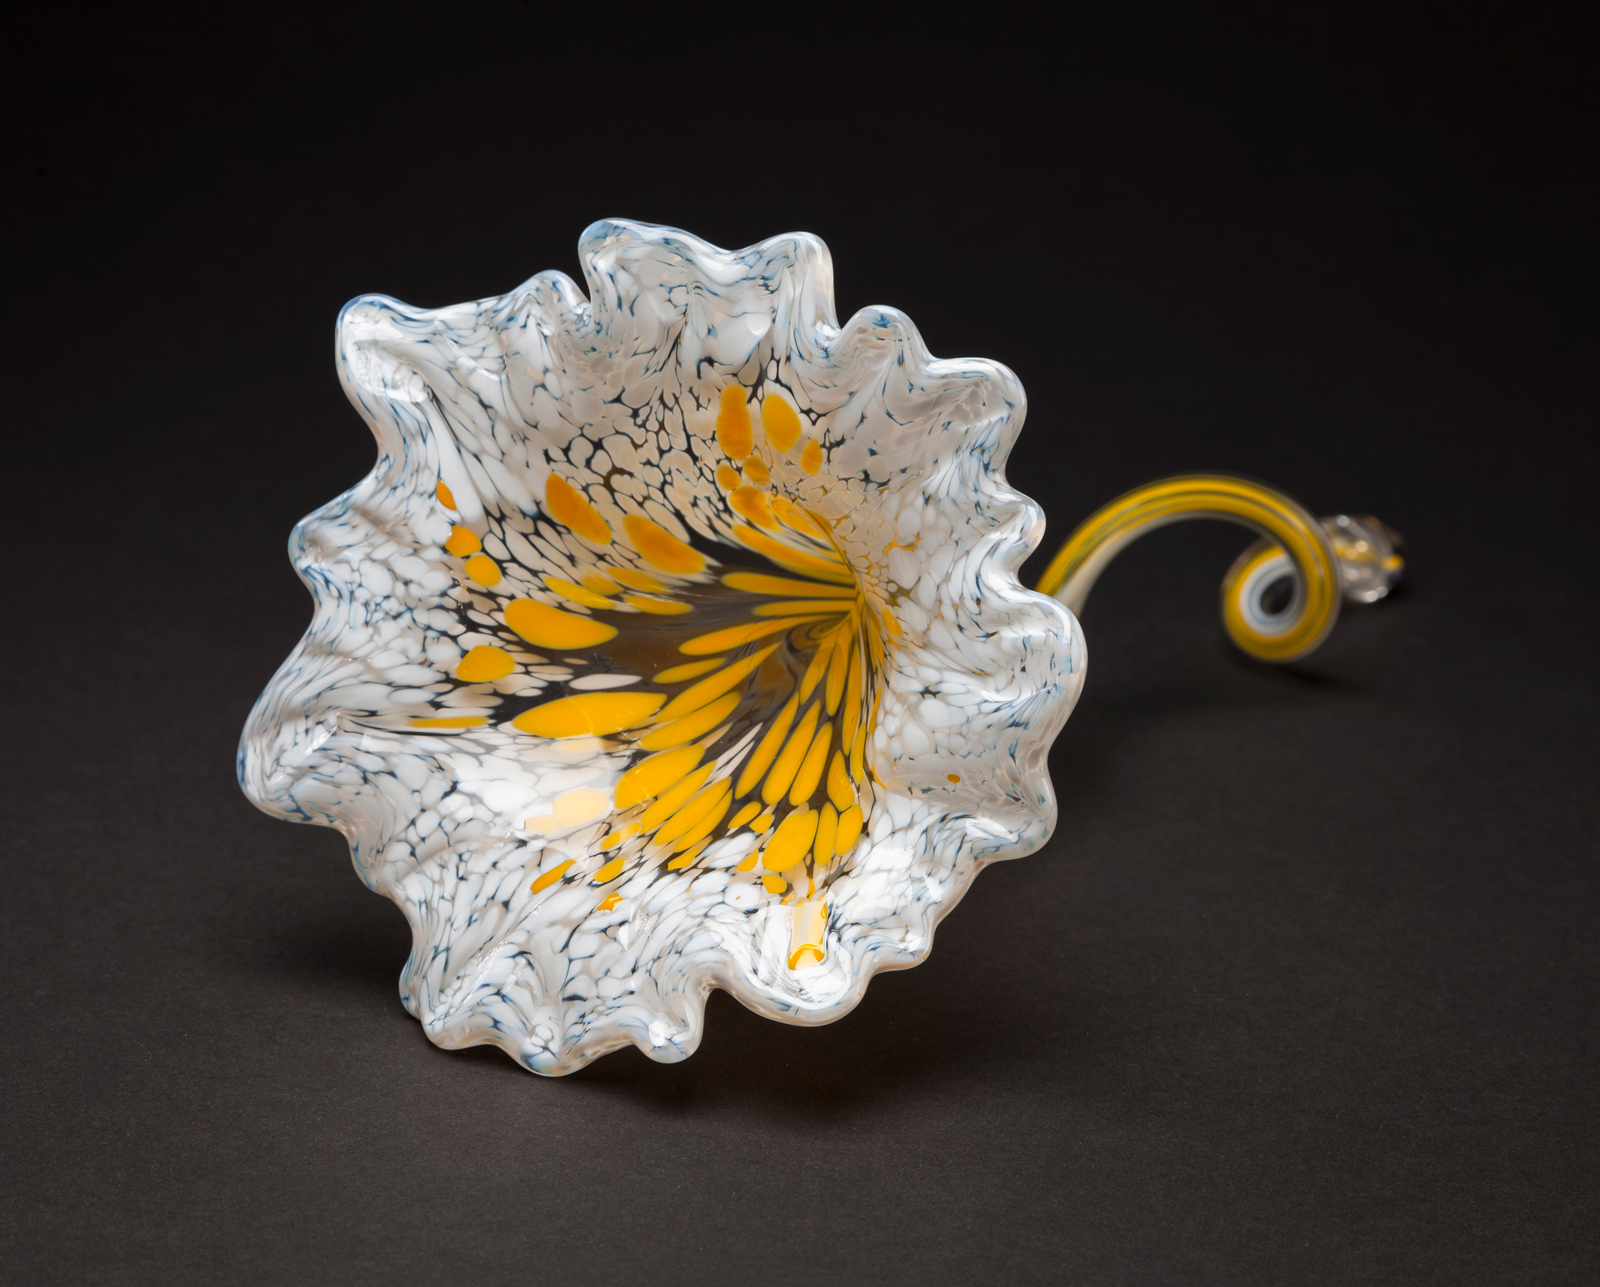 Make Your Own Glass | Corning Museum of Glass